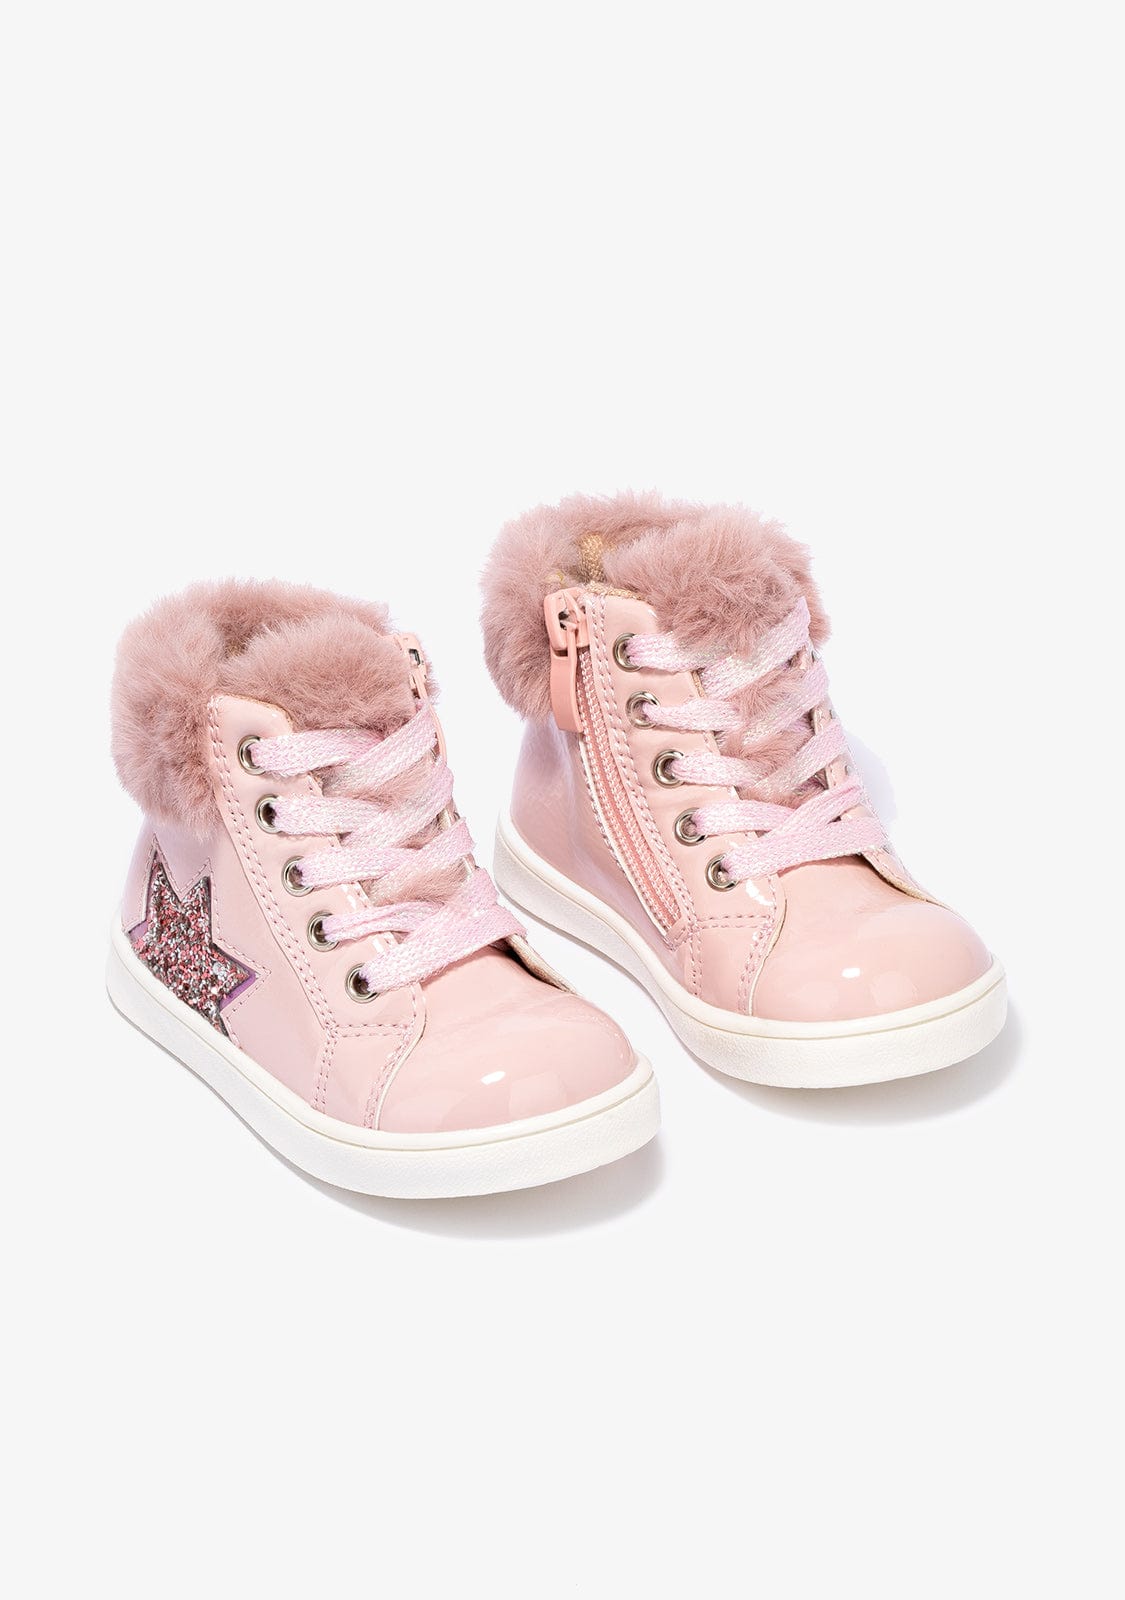 OSITO Shoes Baby's Pink Patent Ankle Boots With Glitter Star